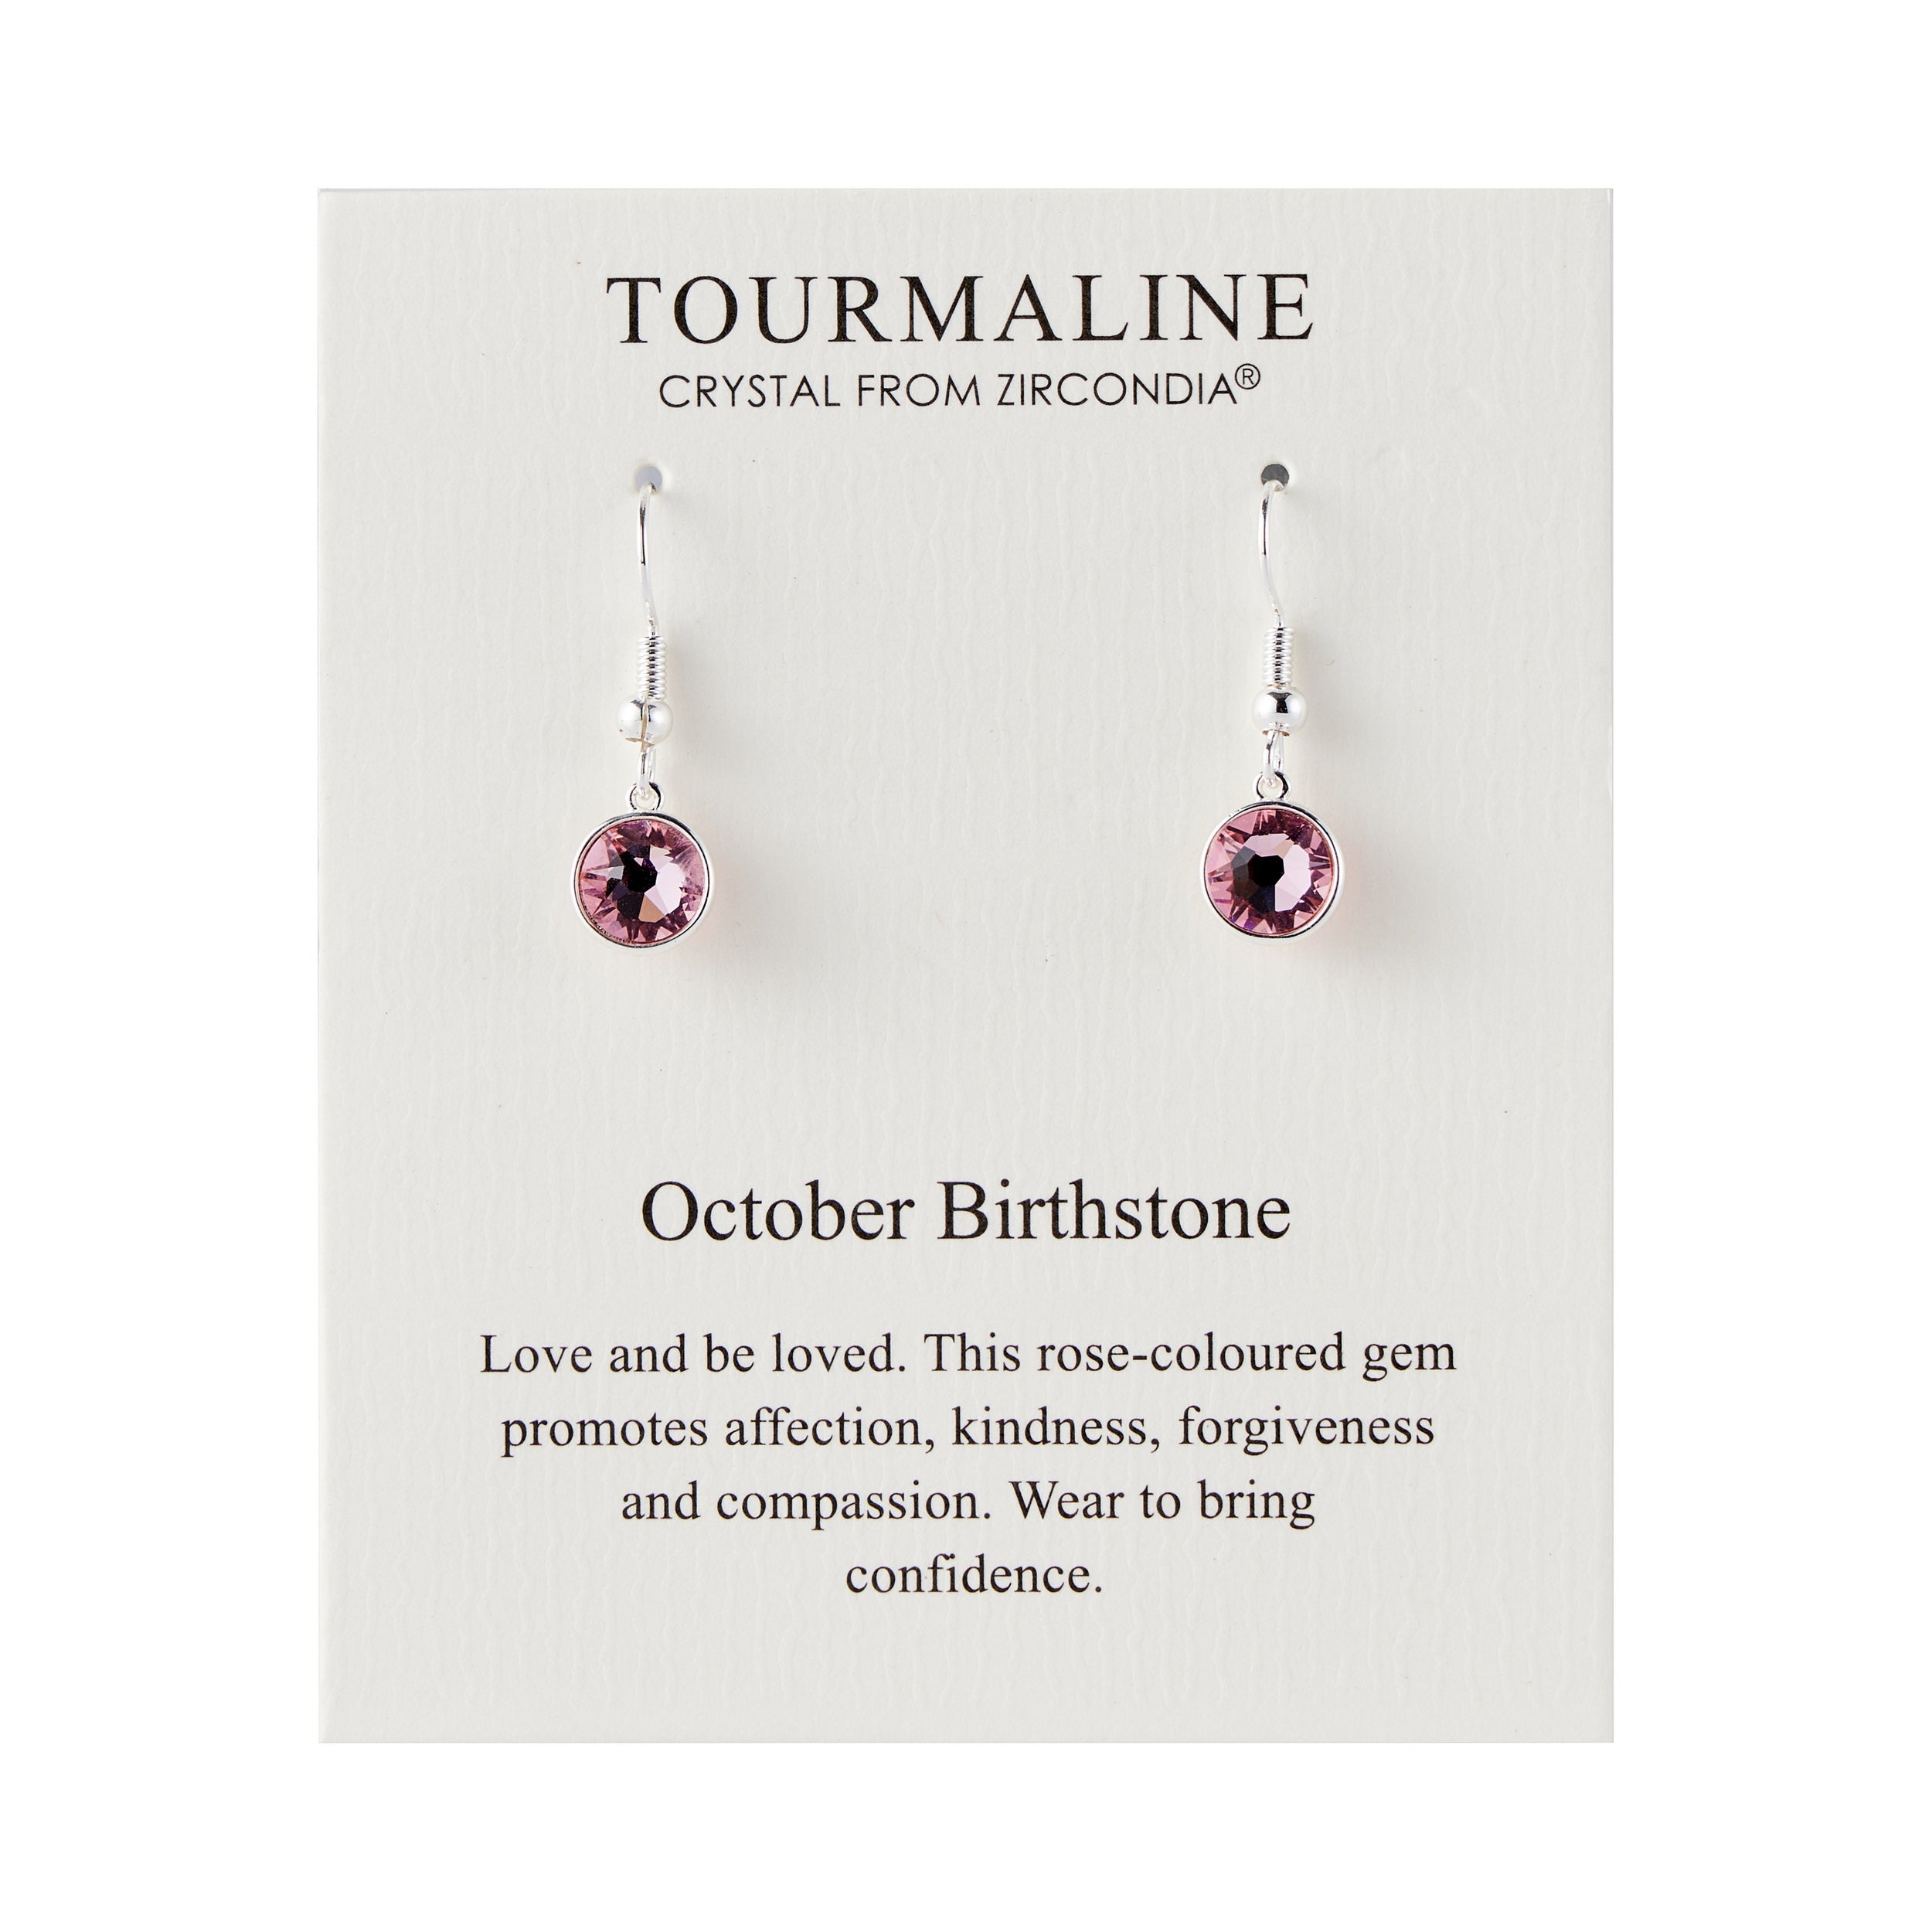 October Birthstone Drop Earrings Created with Tourmaline Zircondia® Crystals